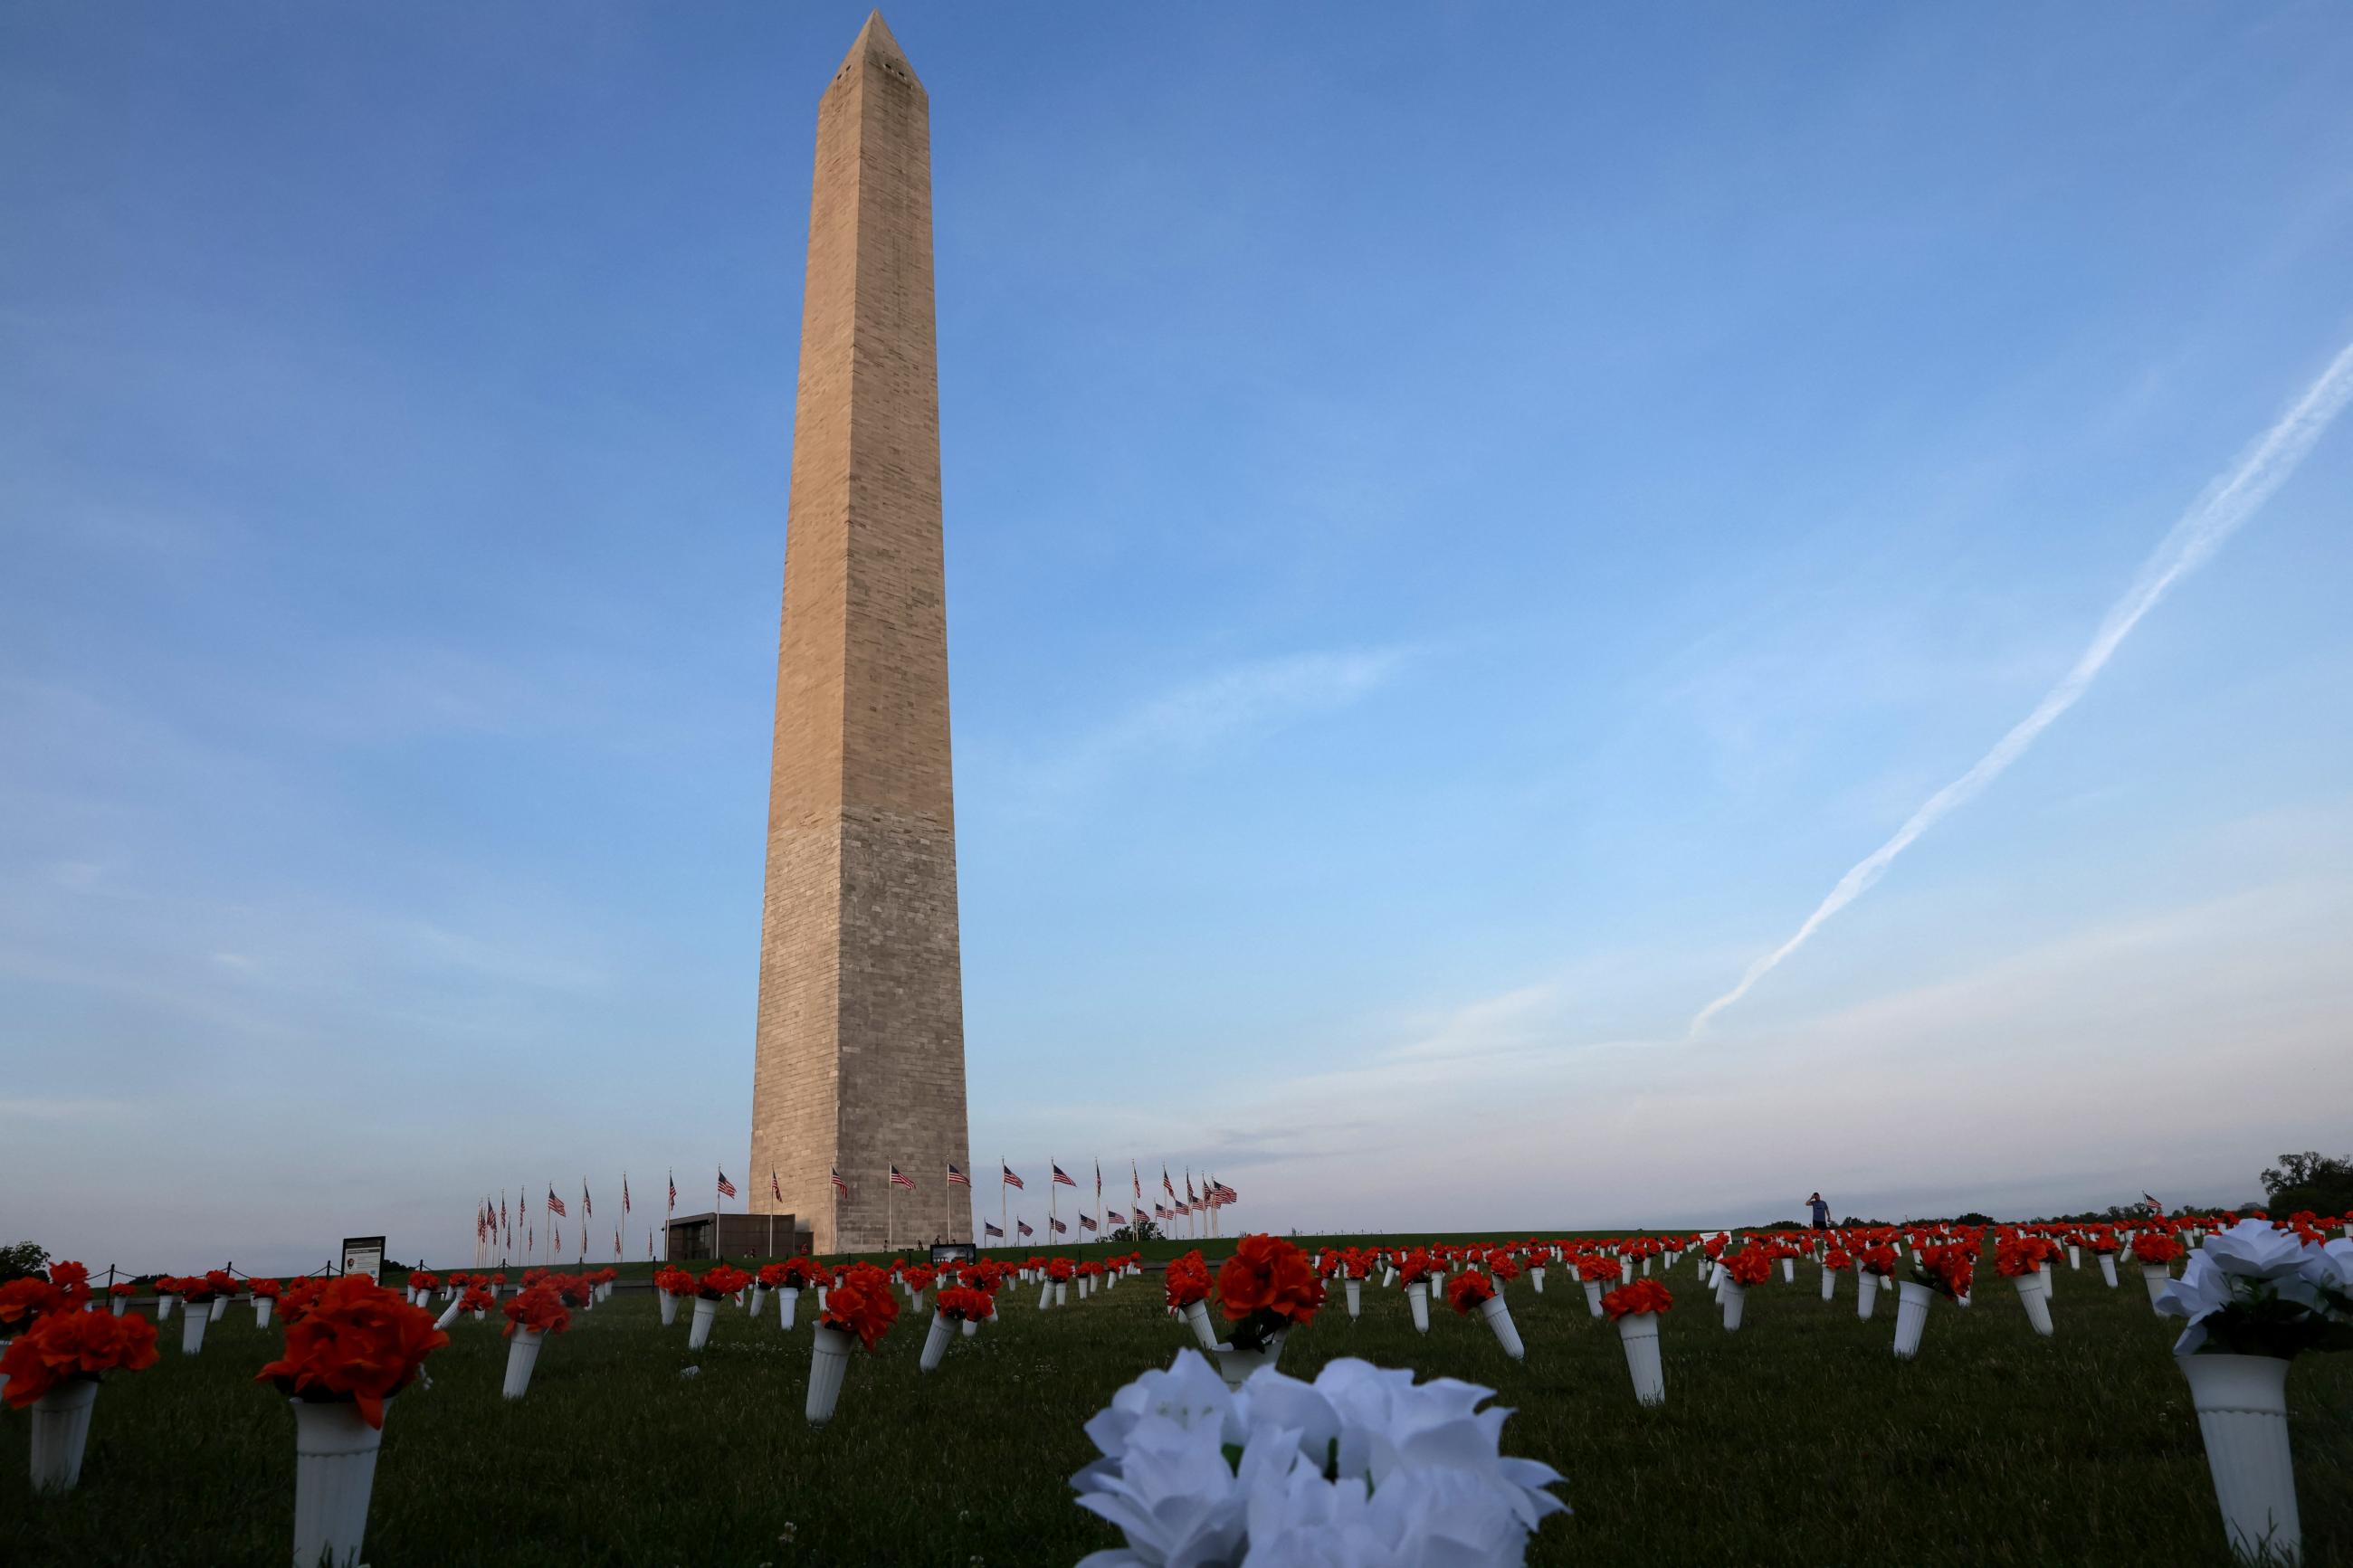 The Washington Monument towers against a backdrop of blue sky over the National Mall, which has been decorated with vases of red and white flowers to commemorate lives lost due to gun violence in 2020